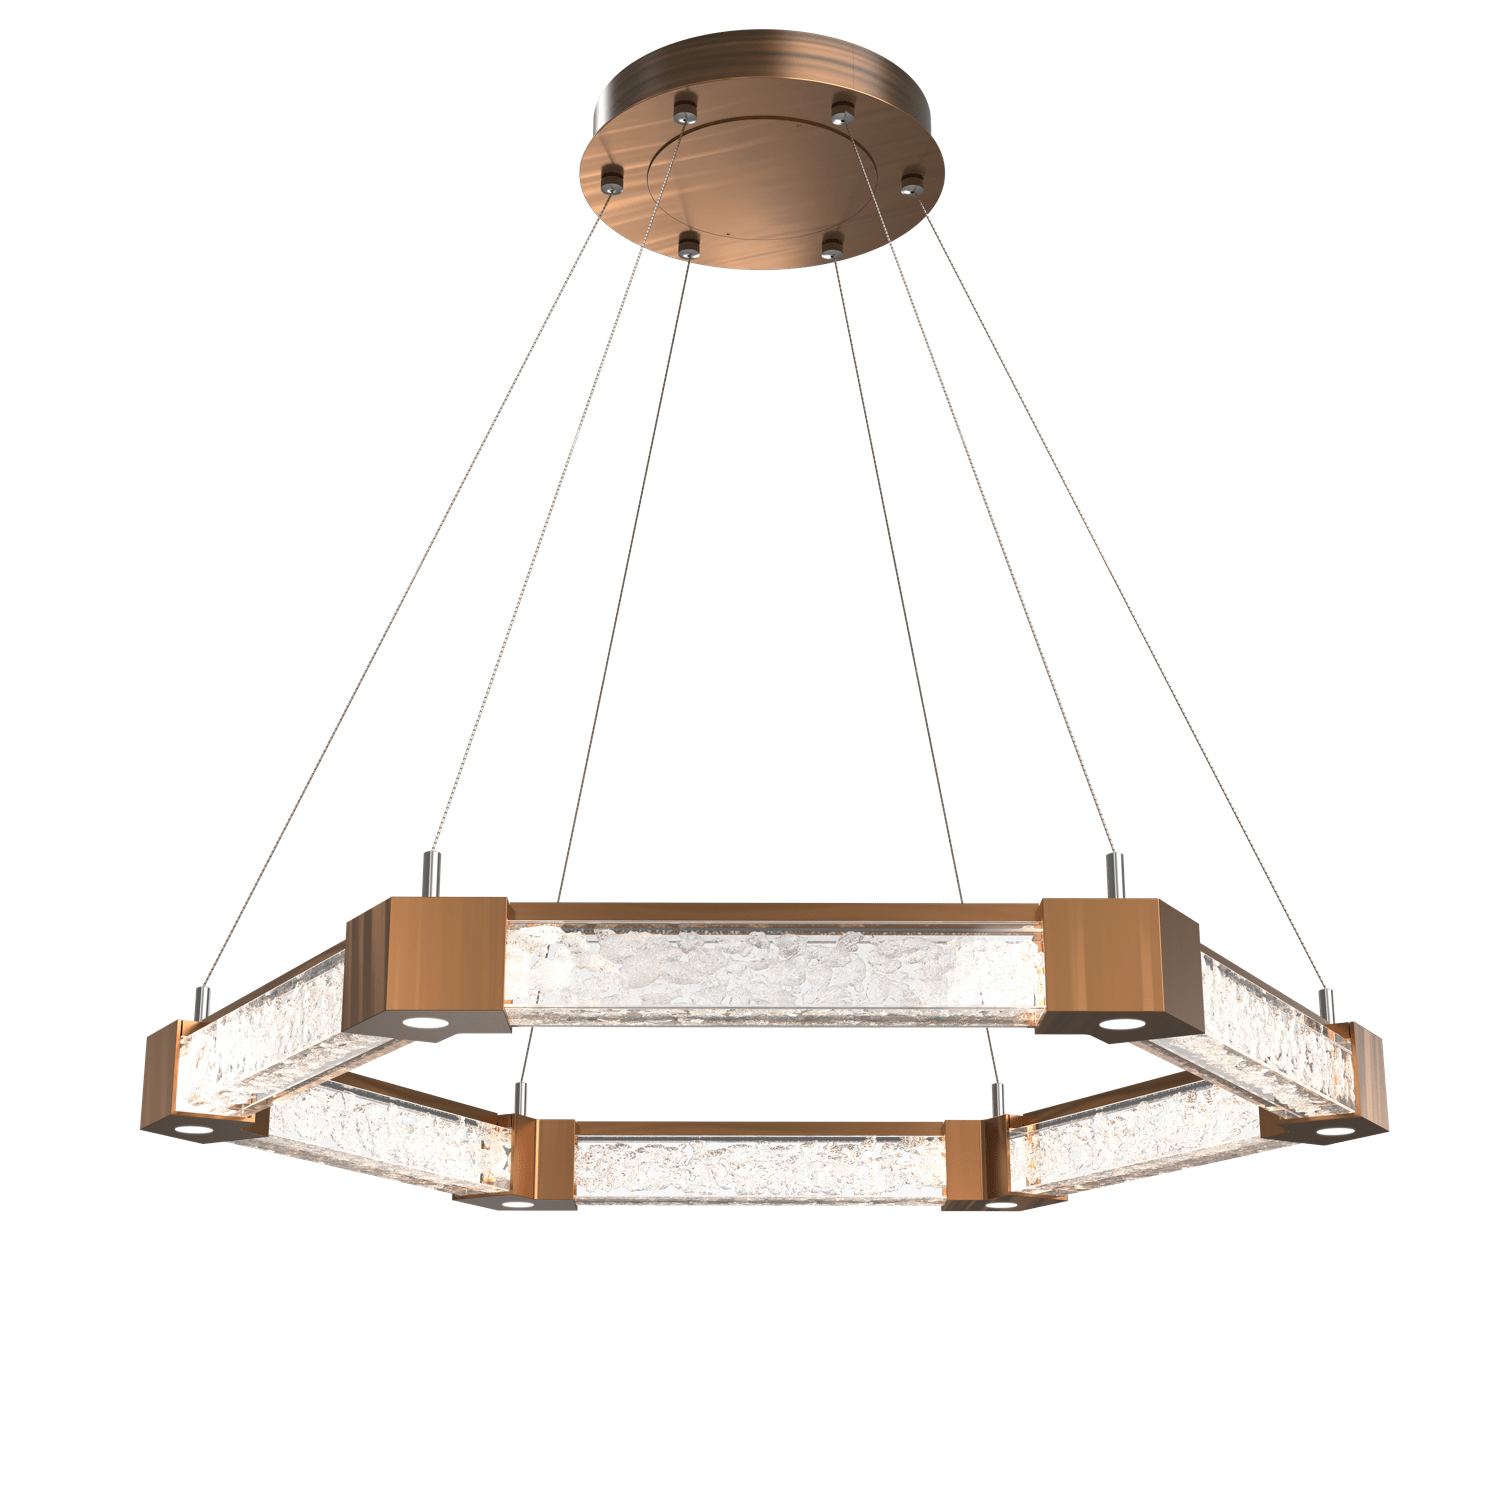 CHB0060-35-RB-GC-Hammerton-Studio-Axis-Hexagonal-Ring-Chandelier-with-Oil-Rubbed-Bronze-finish-and-clear-cast-glass-and-LED-lamping